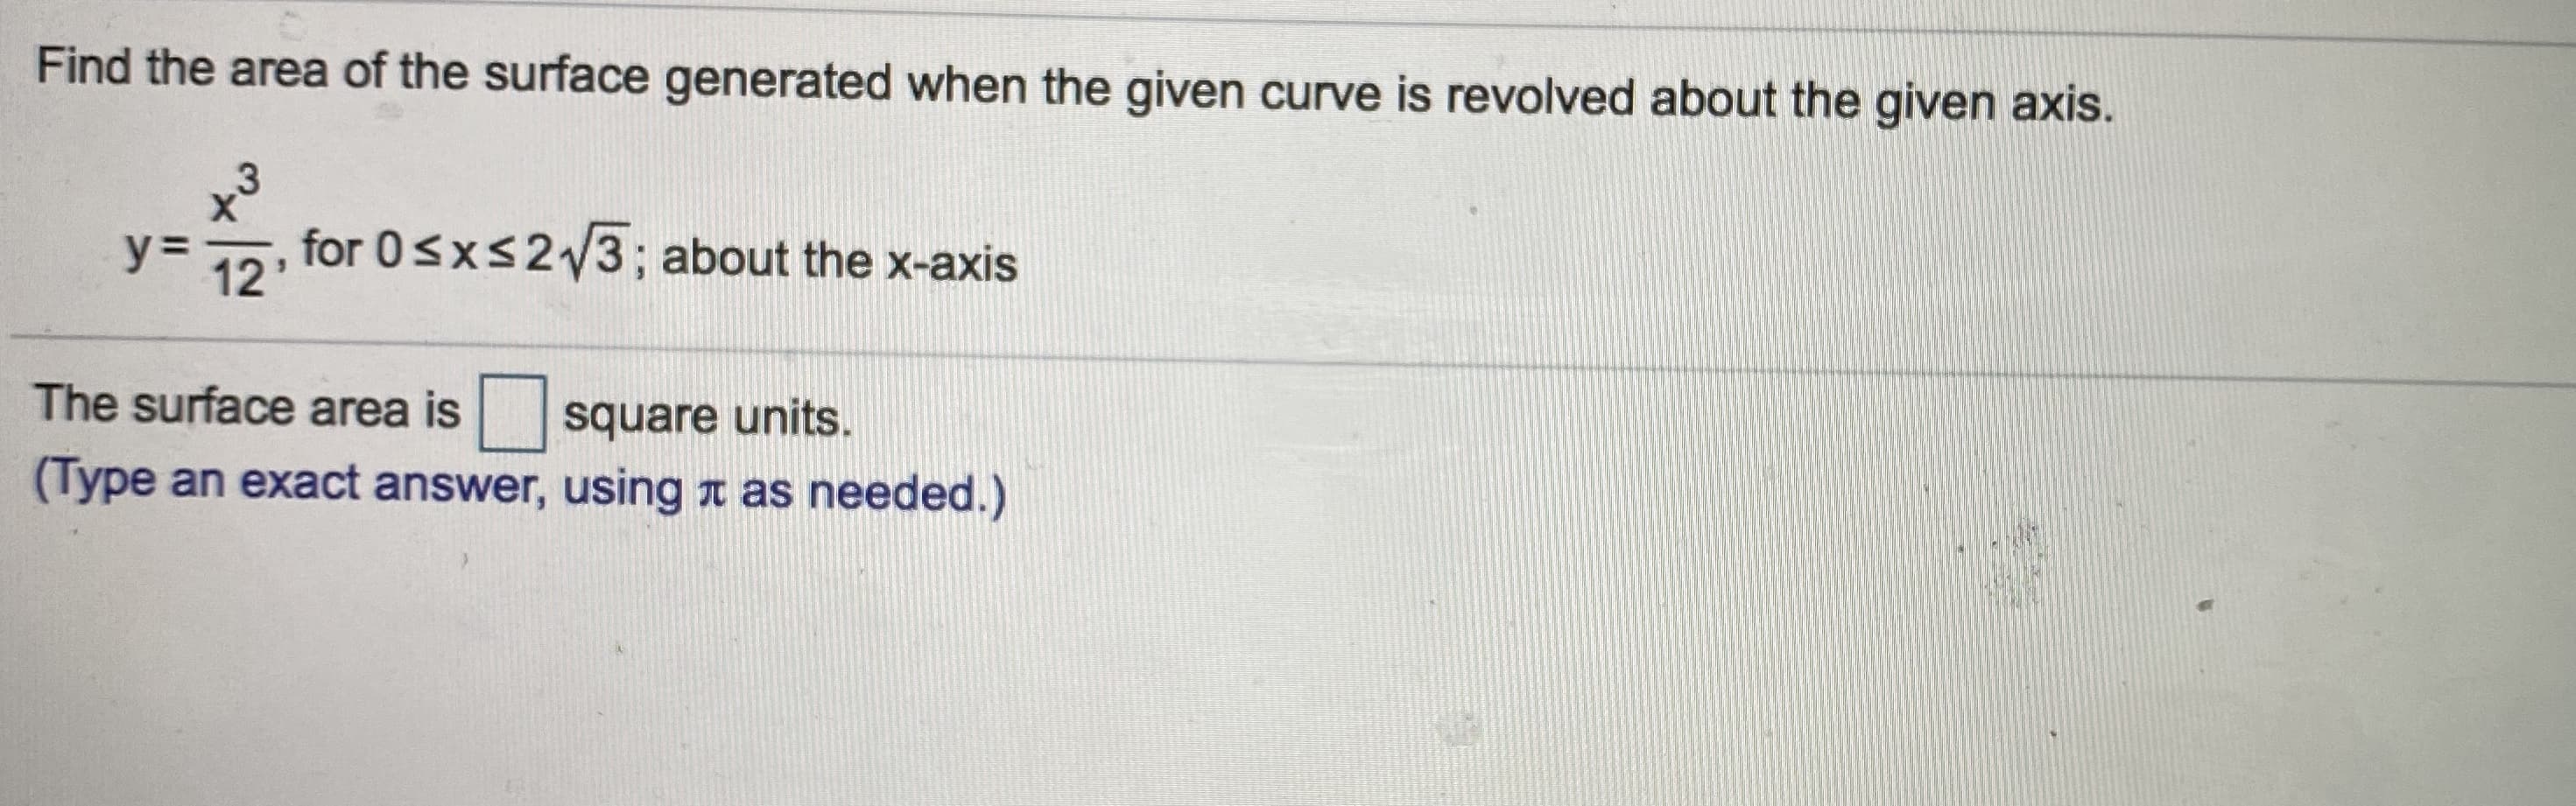 Find the area of the surface generated when the given curve is revolved about the given axis.
y% =
12'
for 0<xs2/3; about the x-axis
The surface area is square units.
(Type an exact answer, using t as needed.)
